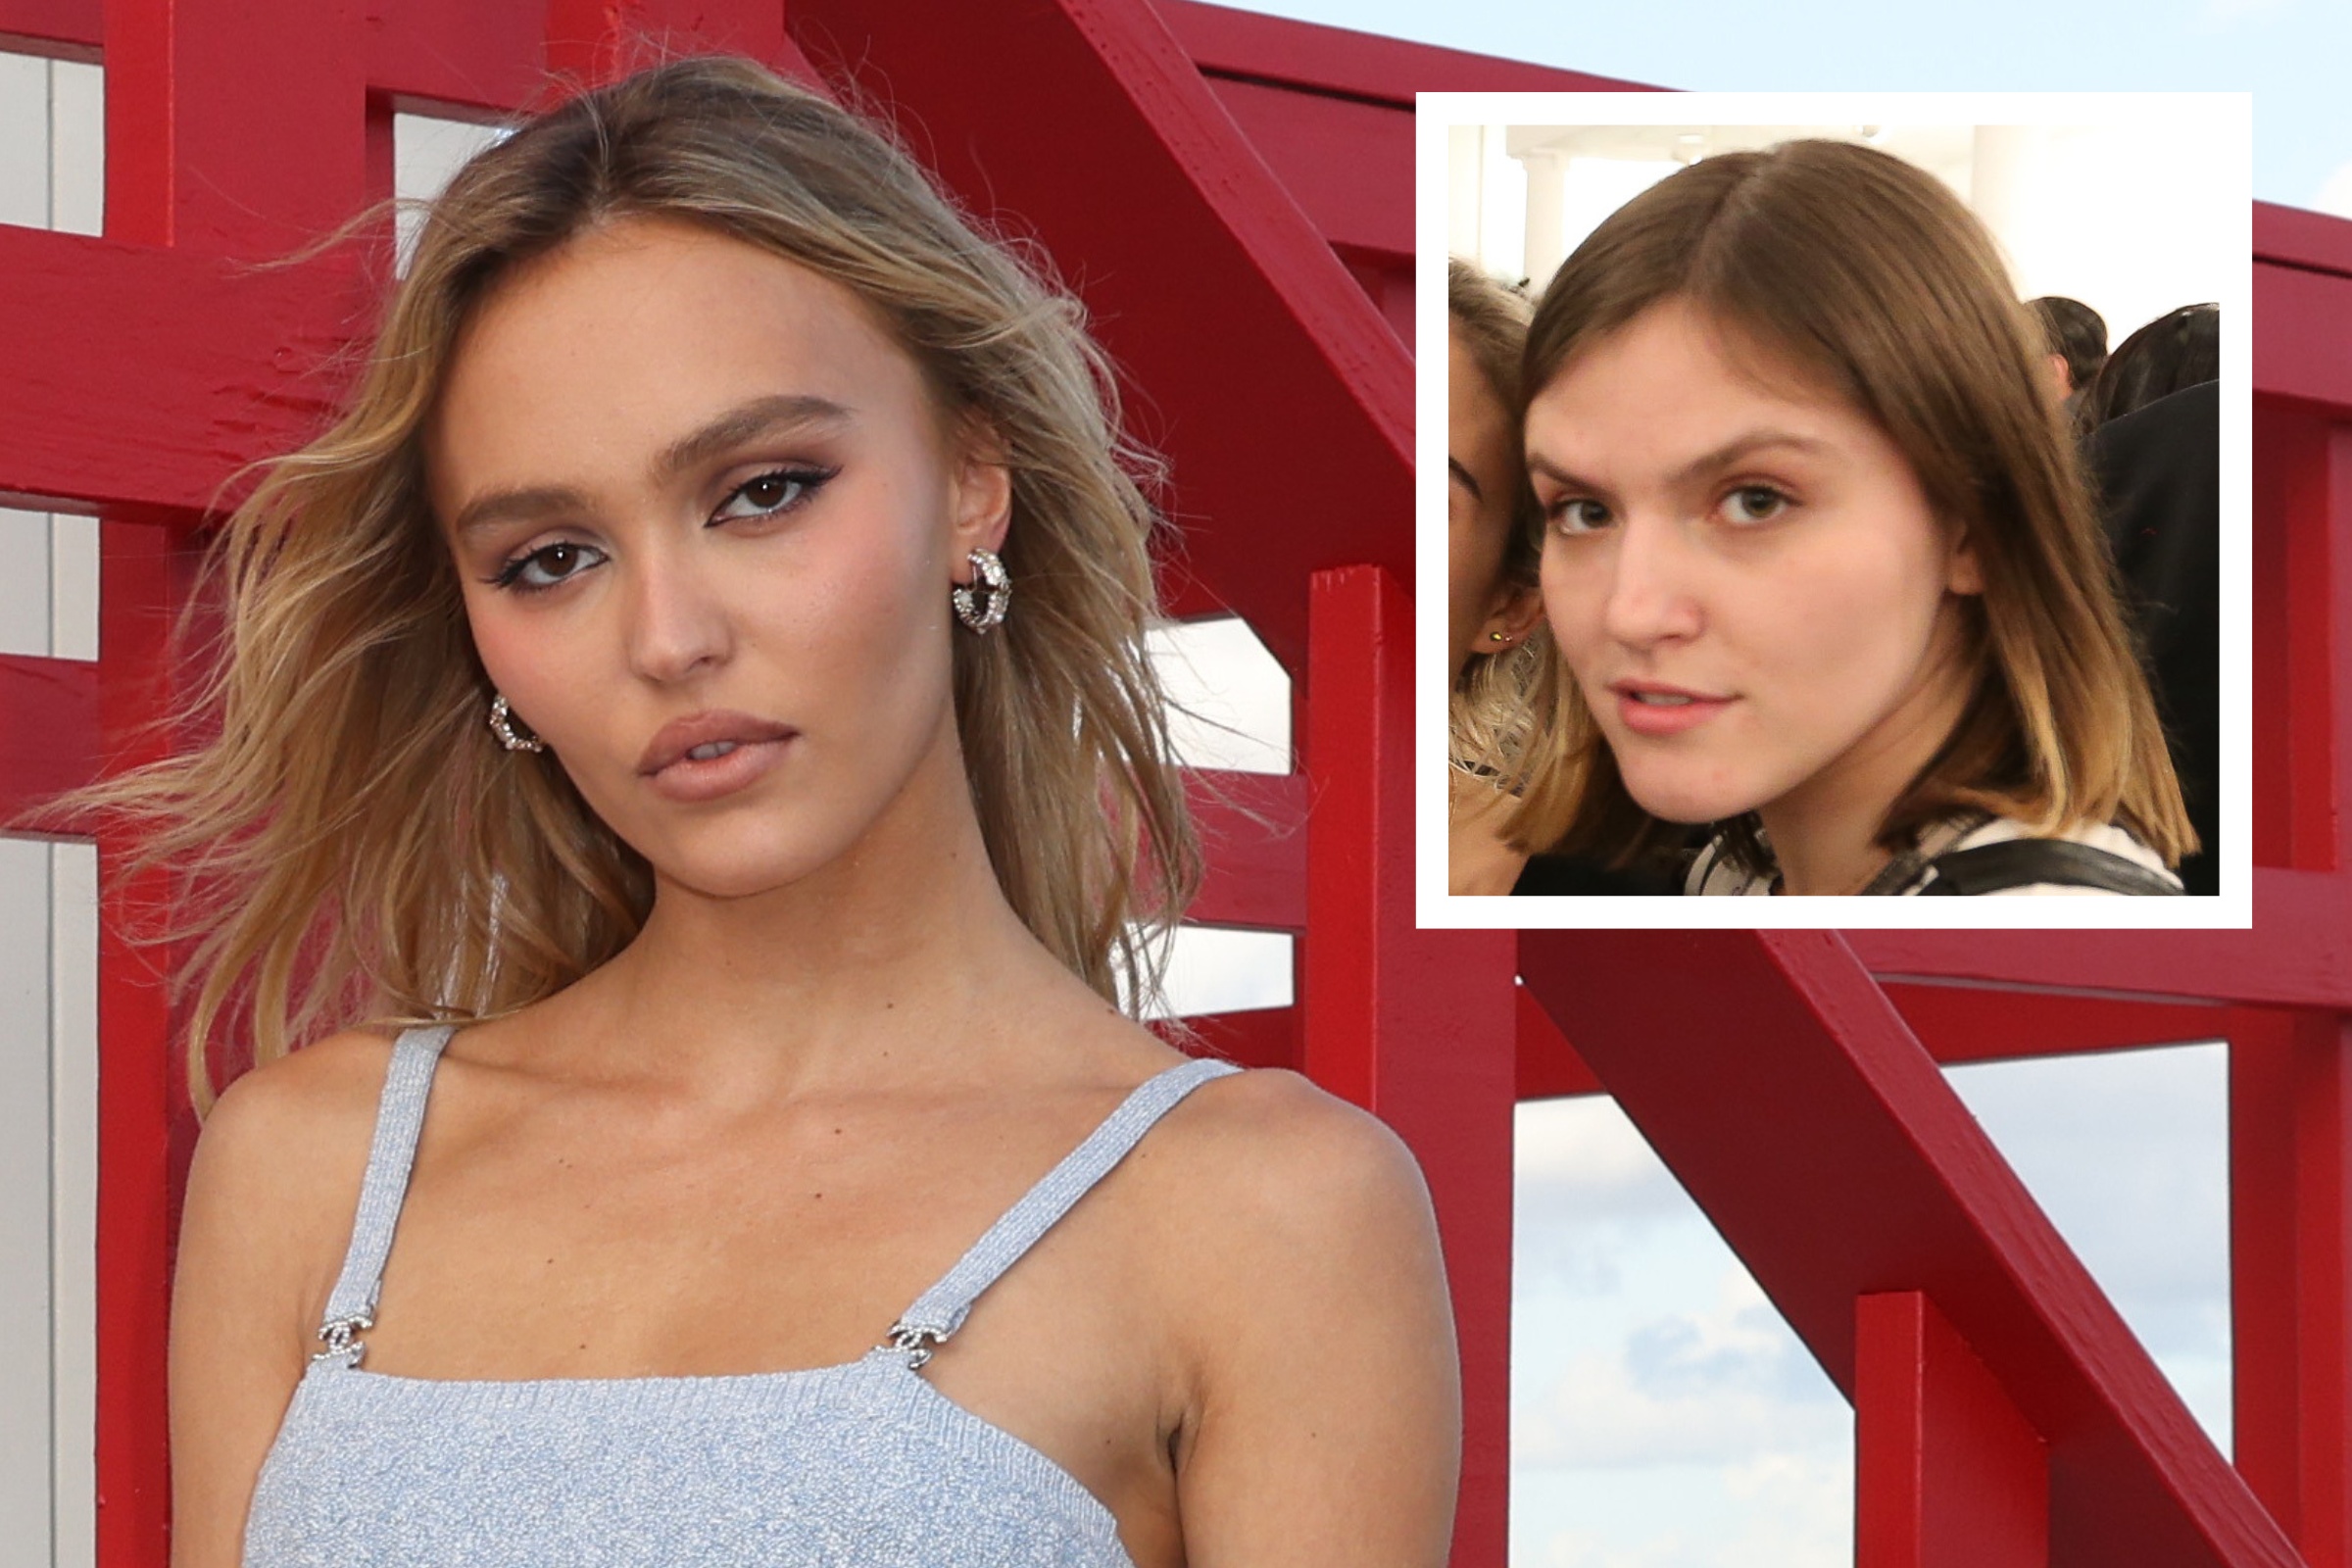 Jack Nicholson's Alleged Daughter Slams Lily-Rose Depp Nepotism Comments